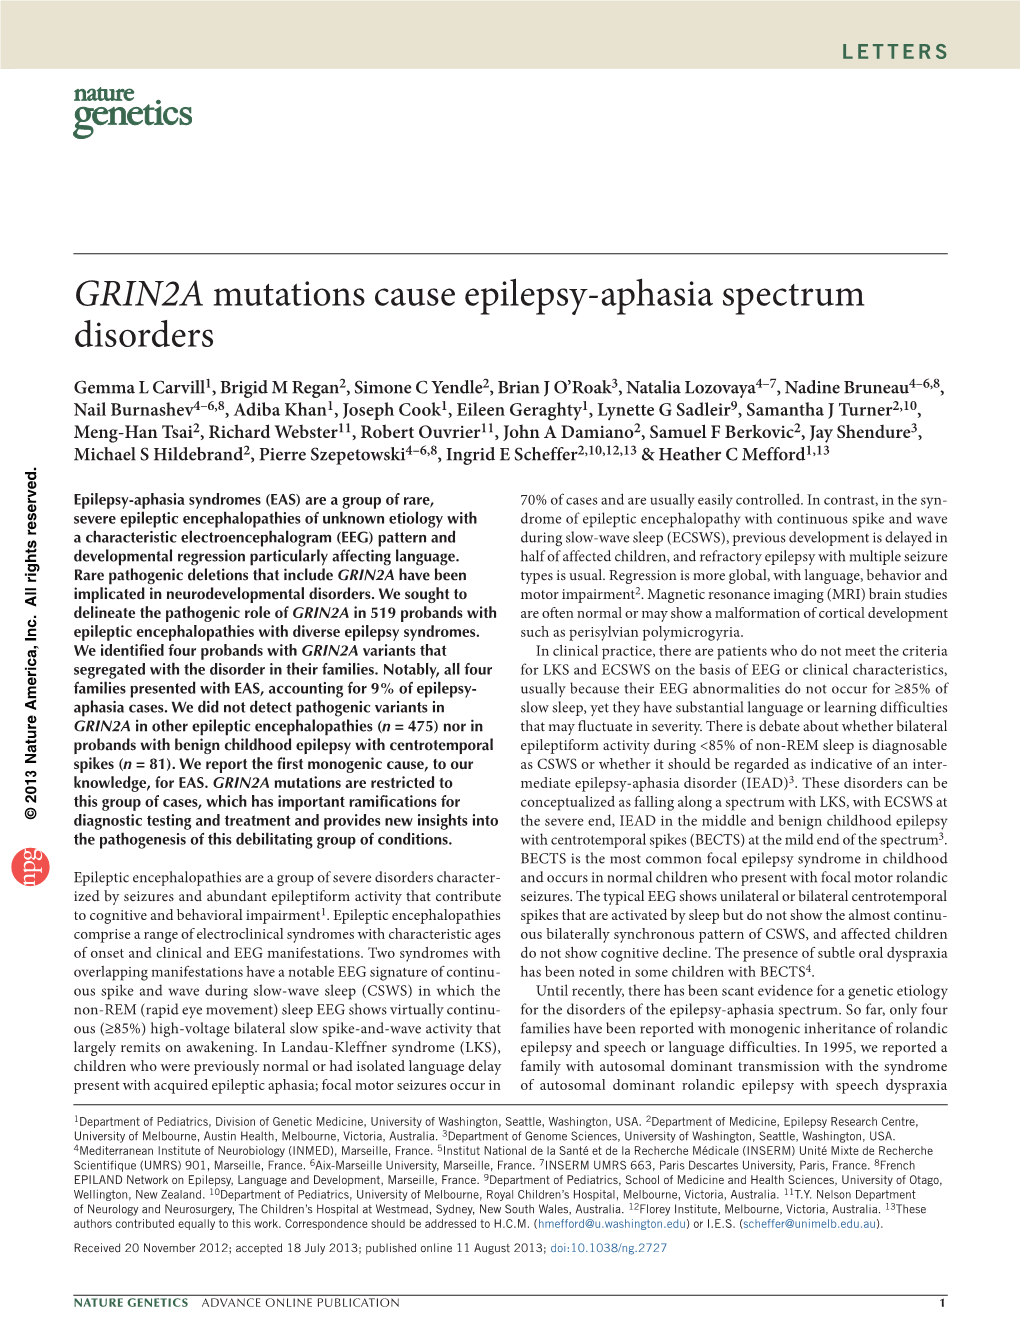 GRIN2A Mutations Cause Epilepsy-Aphasia Spectrum Disorders